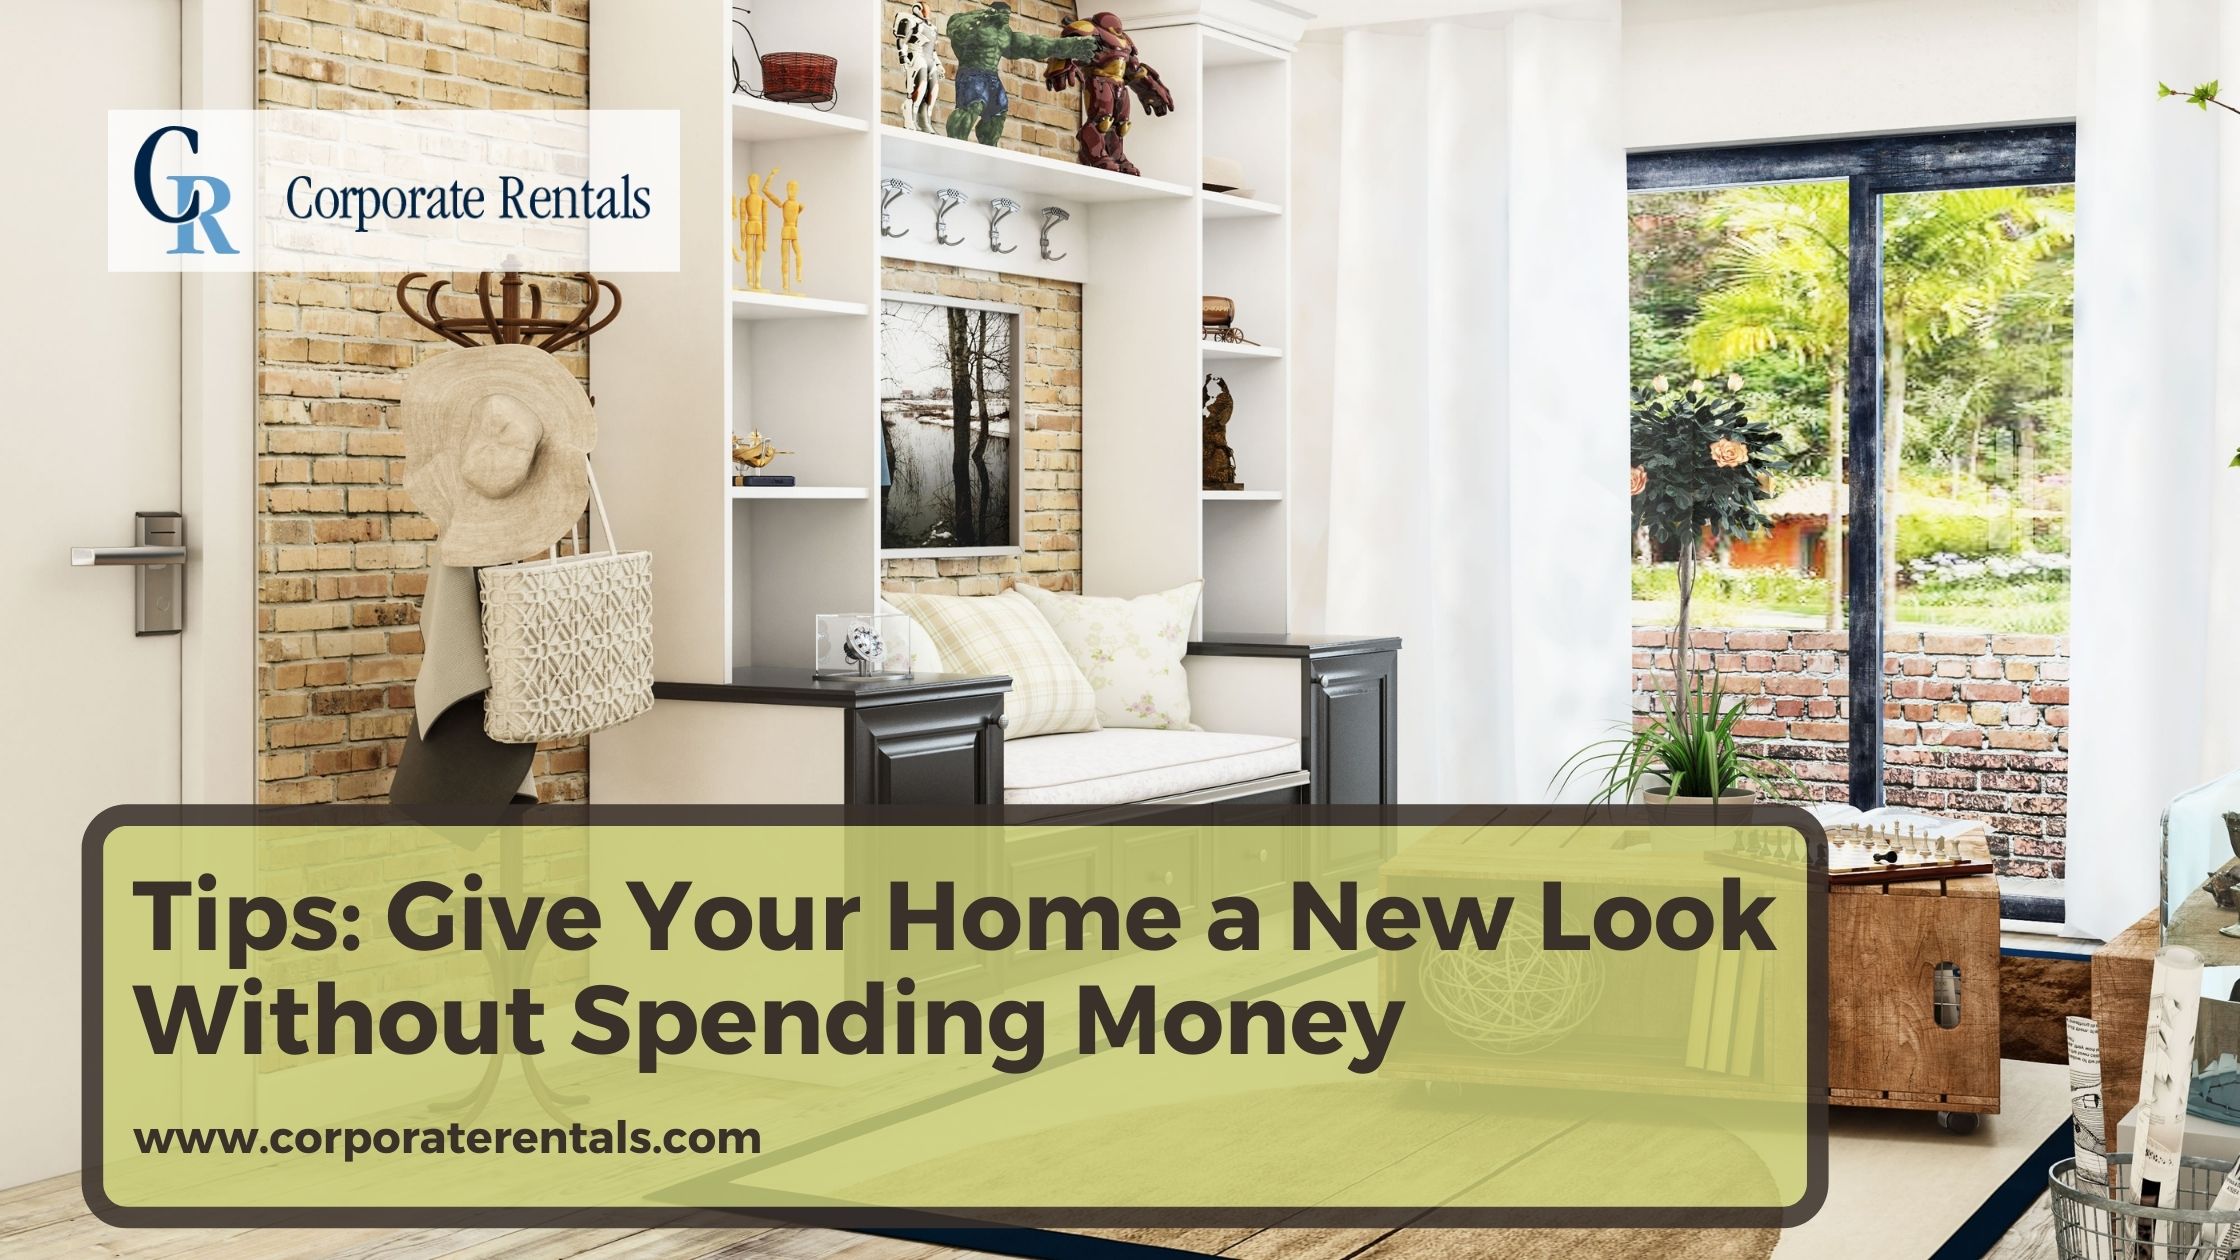 Furniture Rental Tips: Give Your Home a New Look Without Spending Money